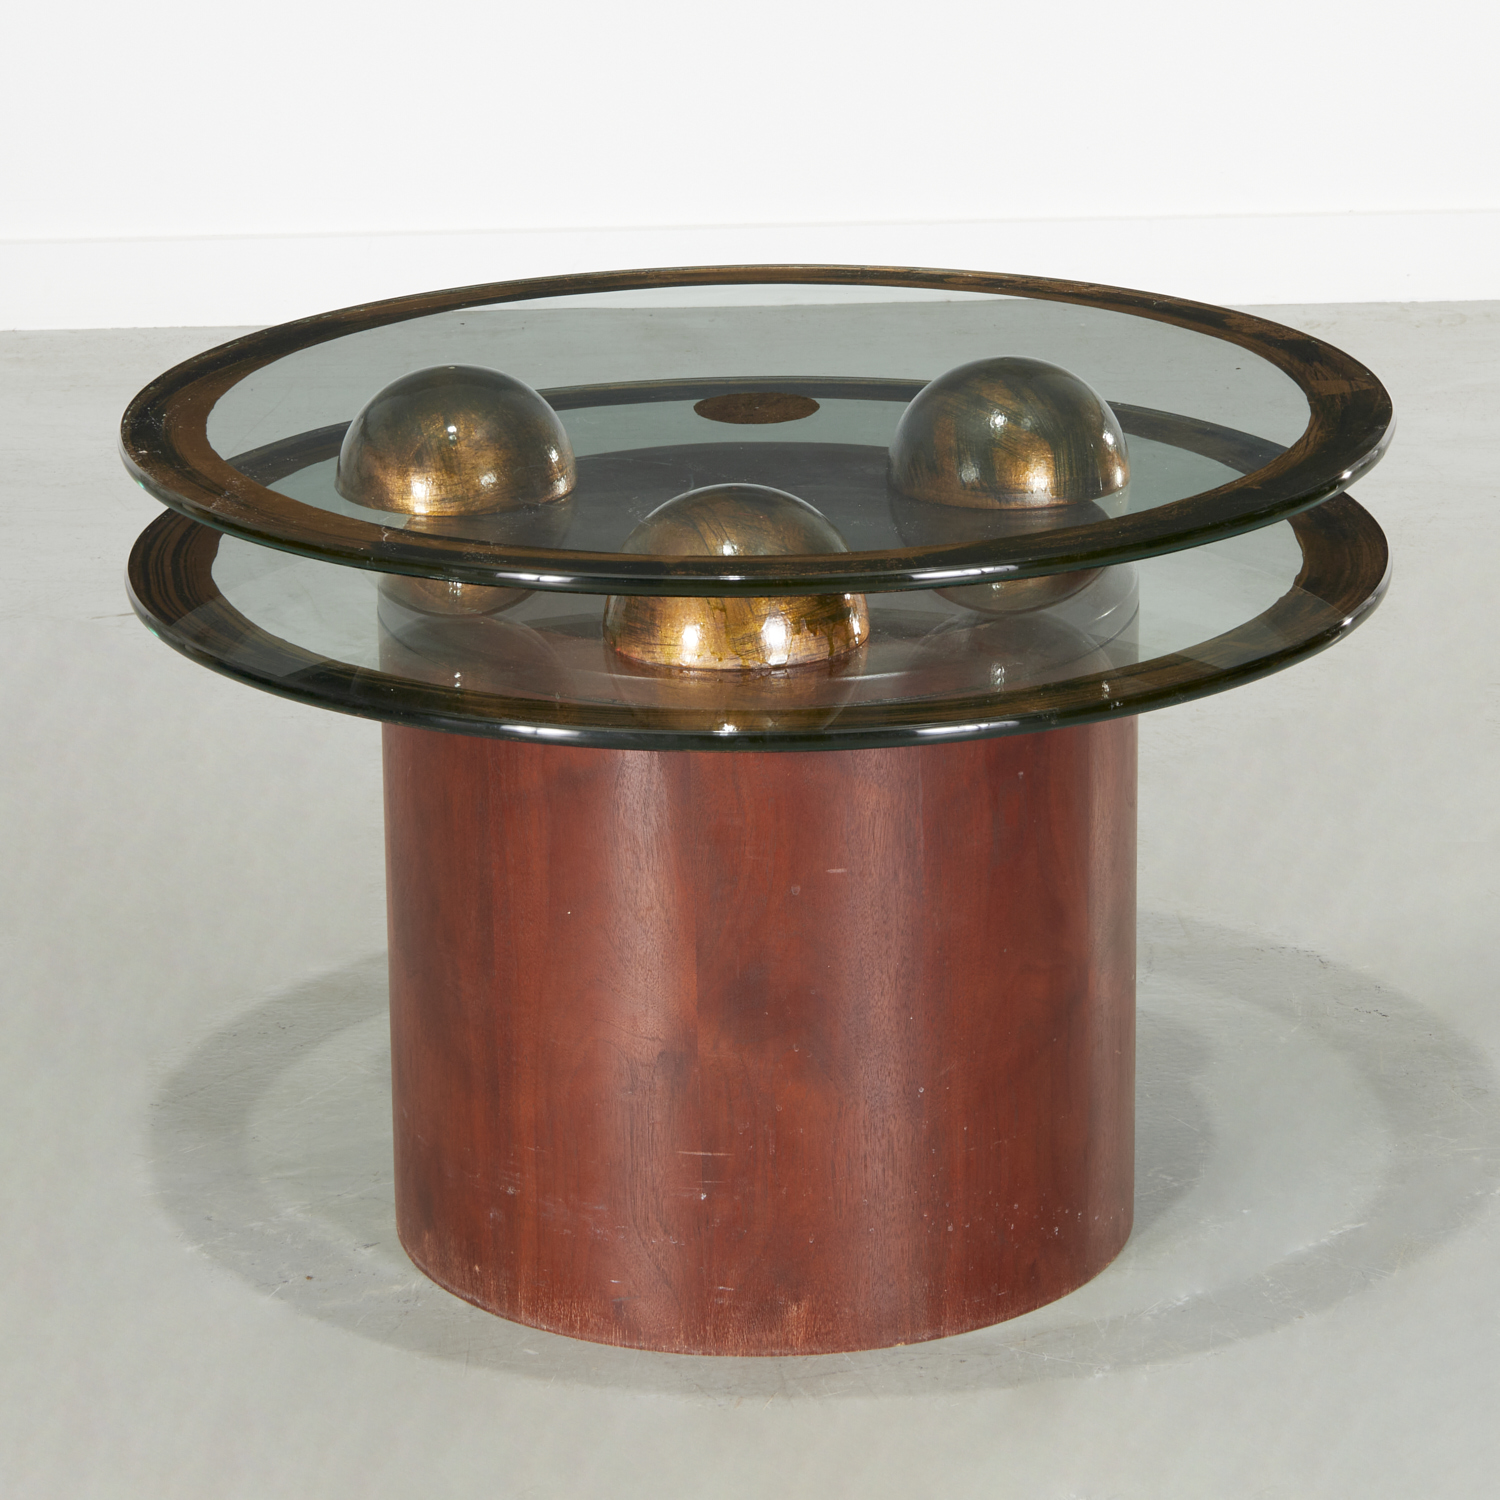 MODERNIST WOOD AND GLASS SIDE TABLE